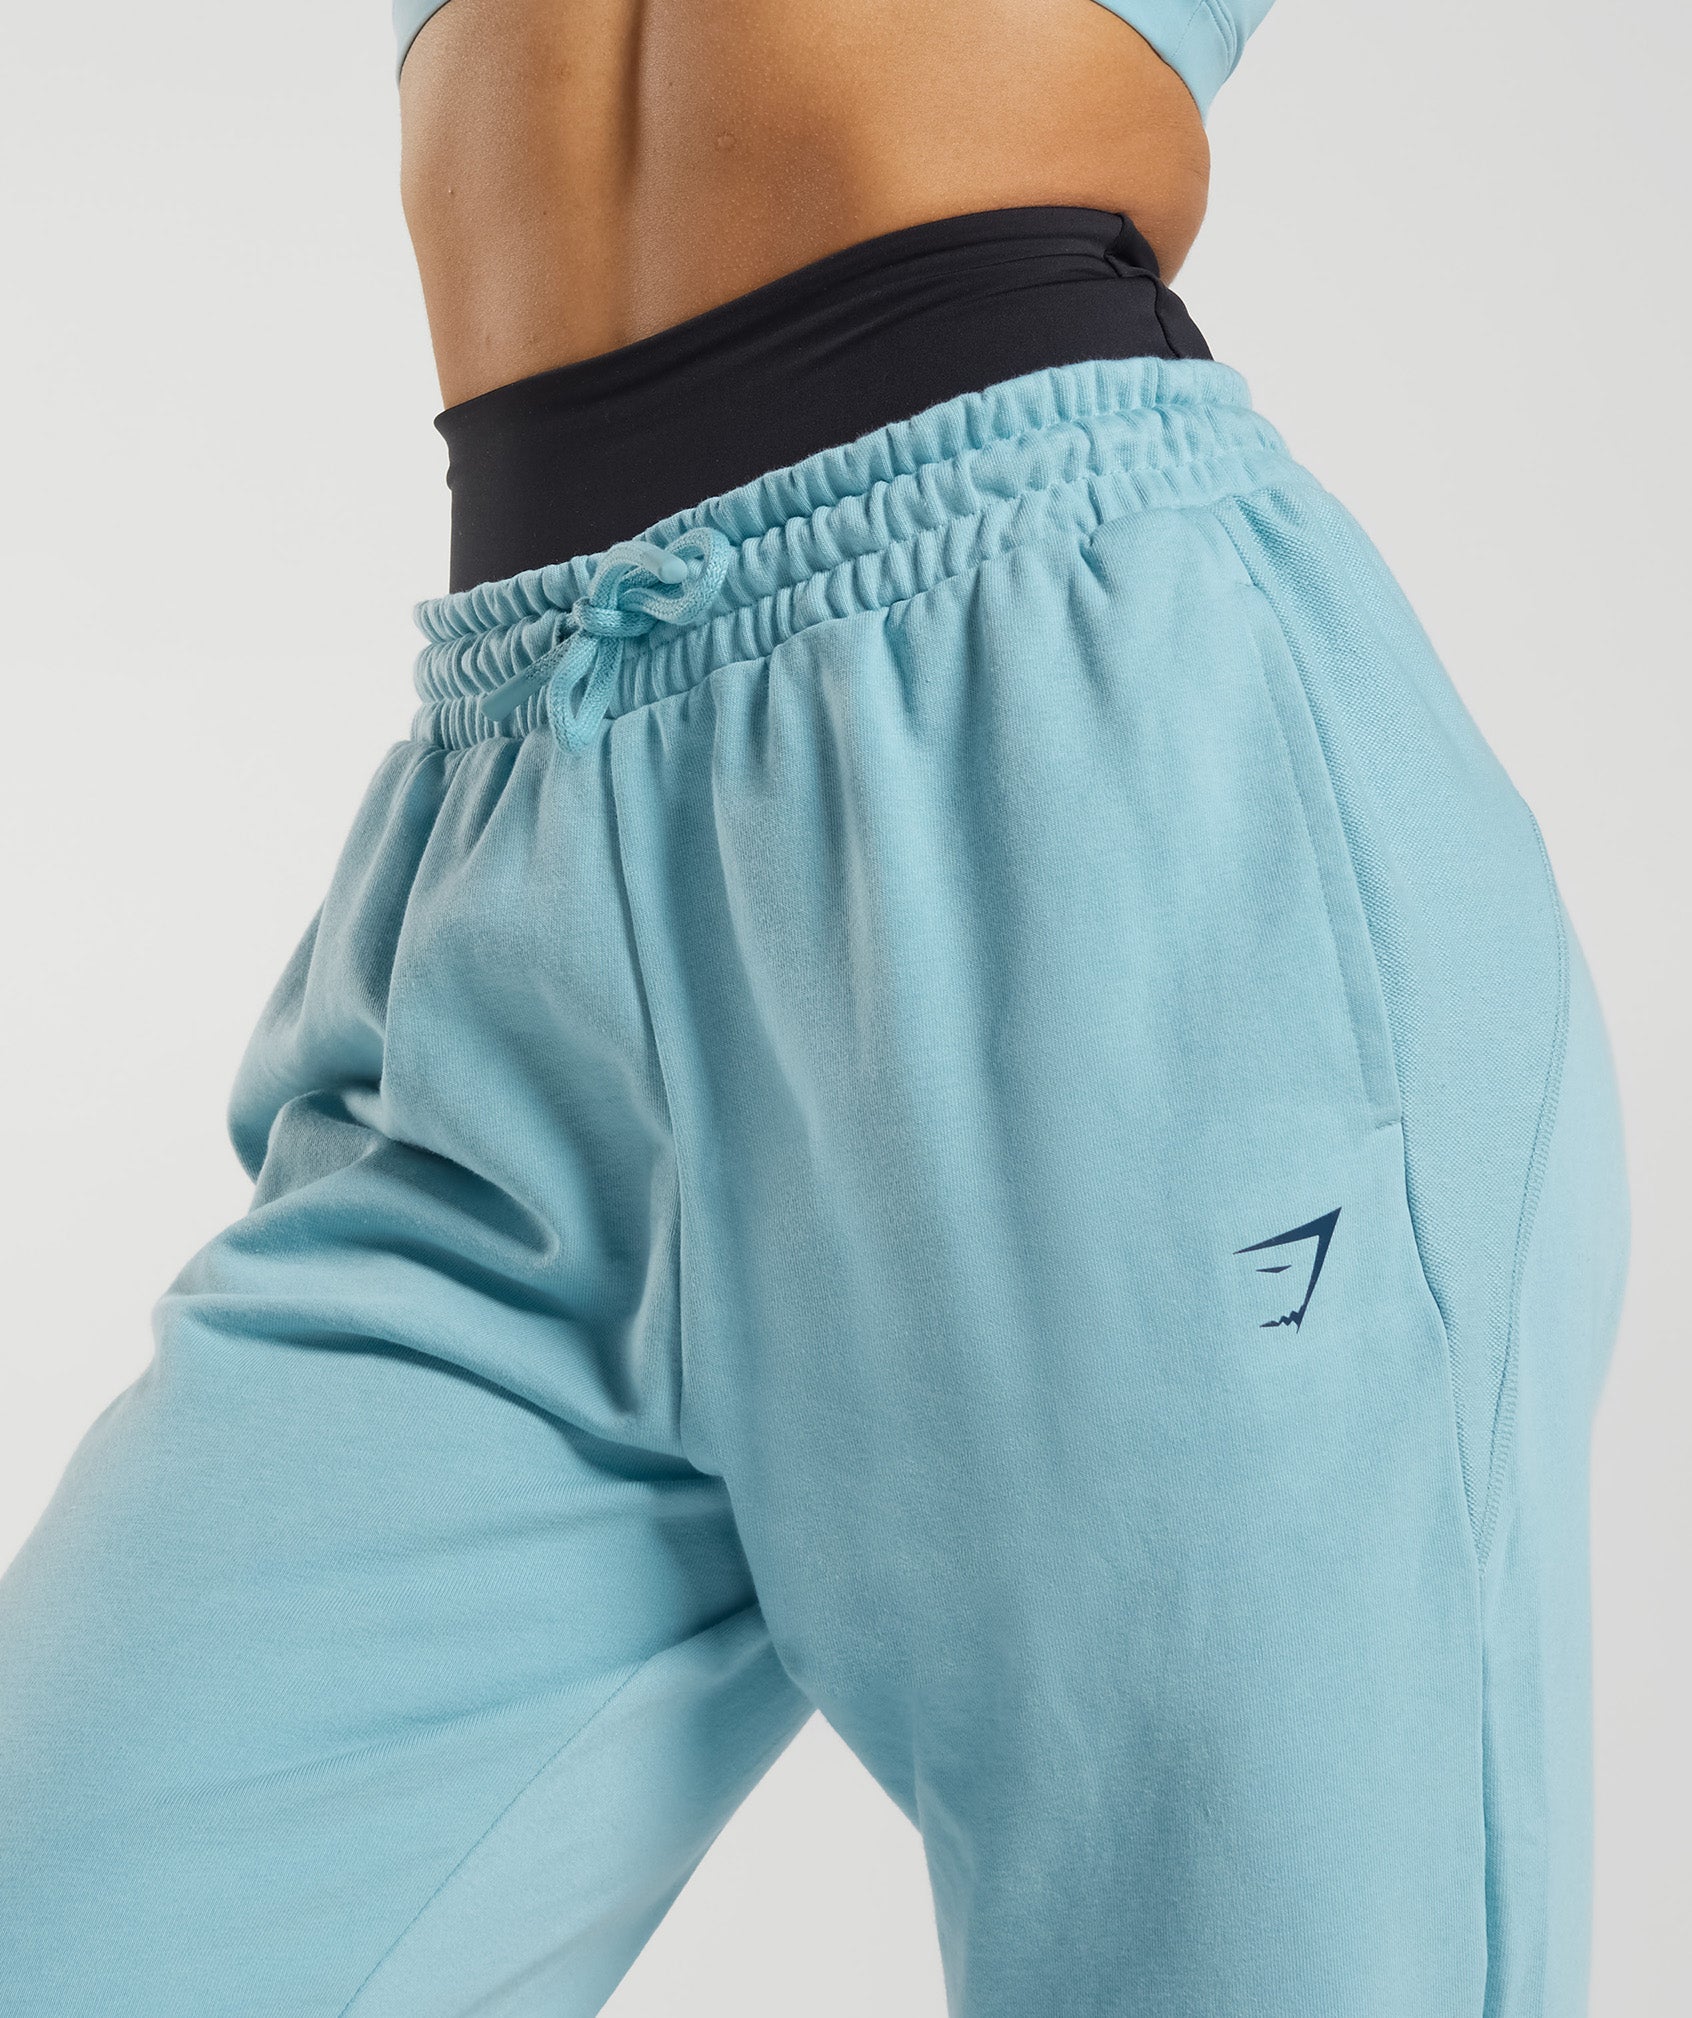 GS Power Joggers in Iceberg Blue - view 3